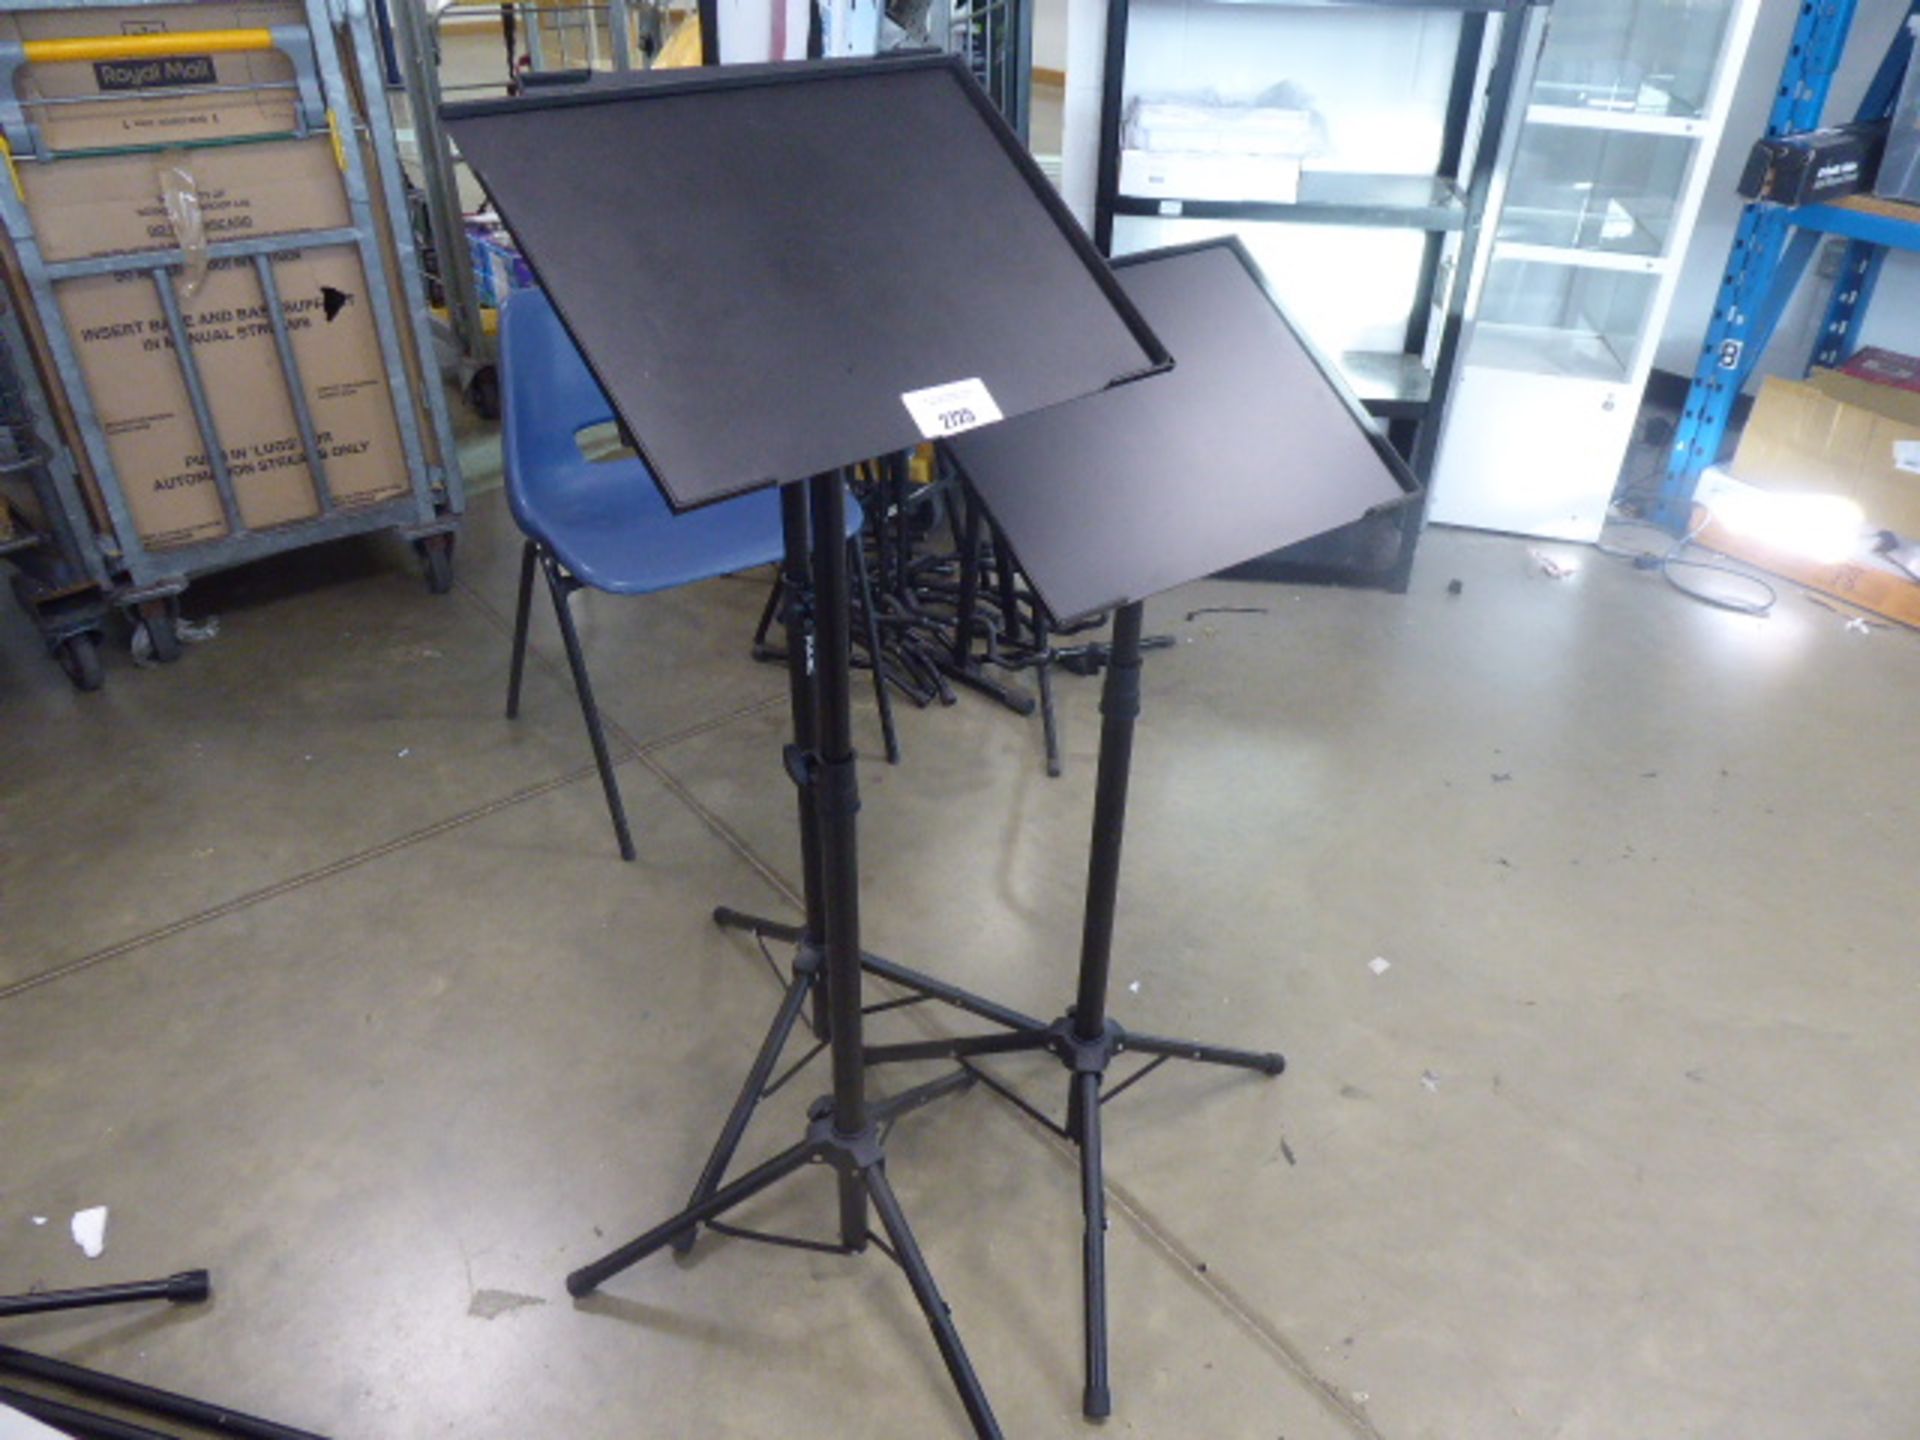 Three projector music stands